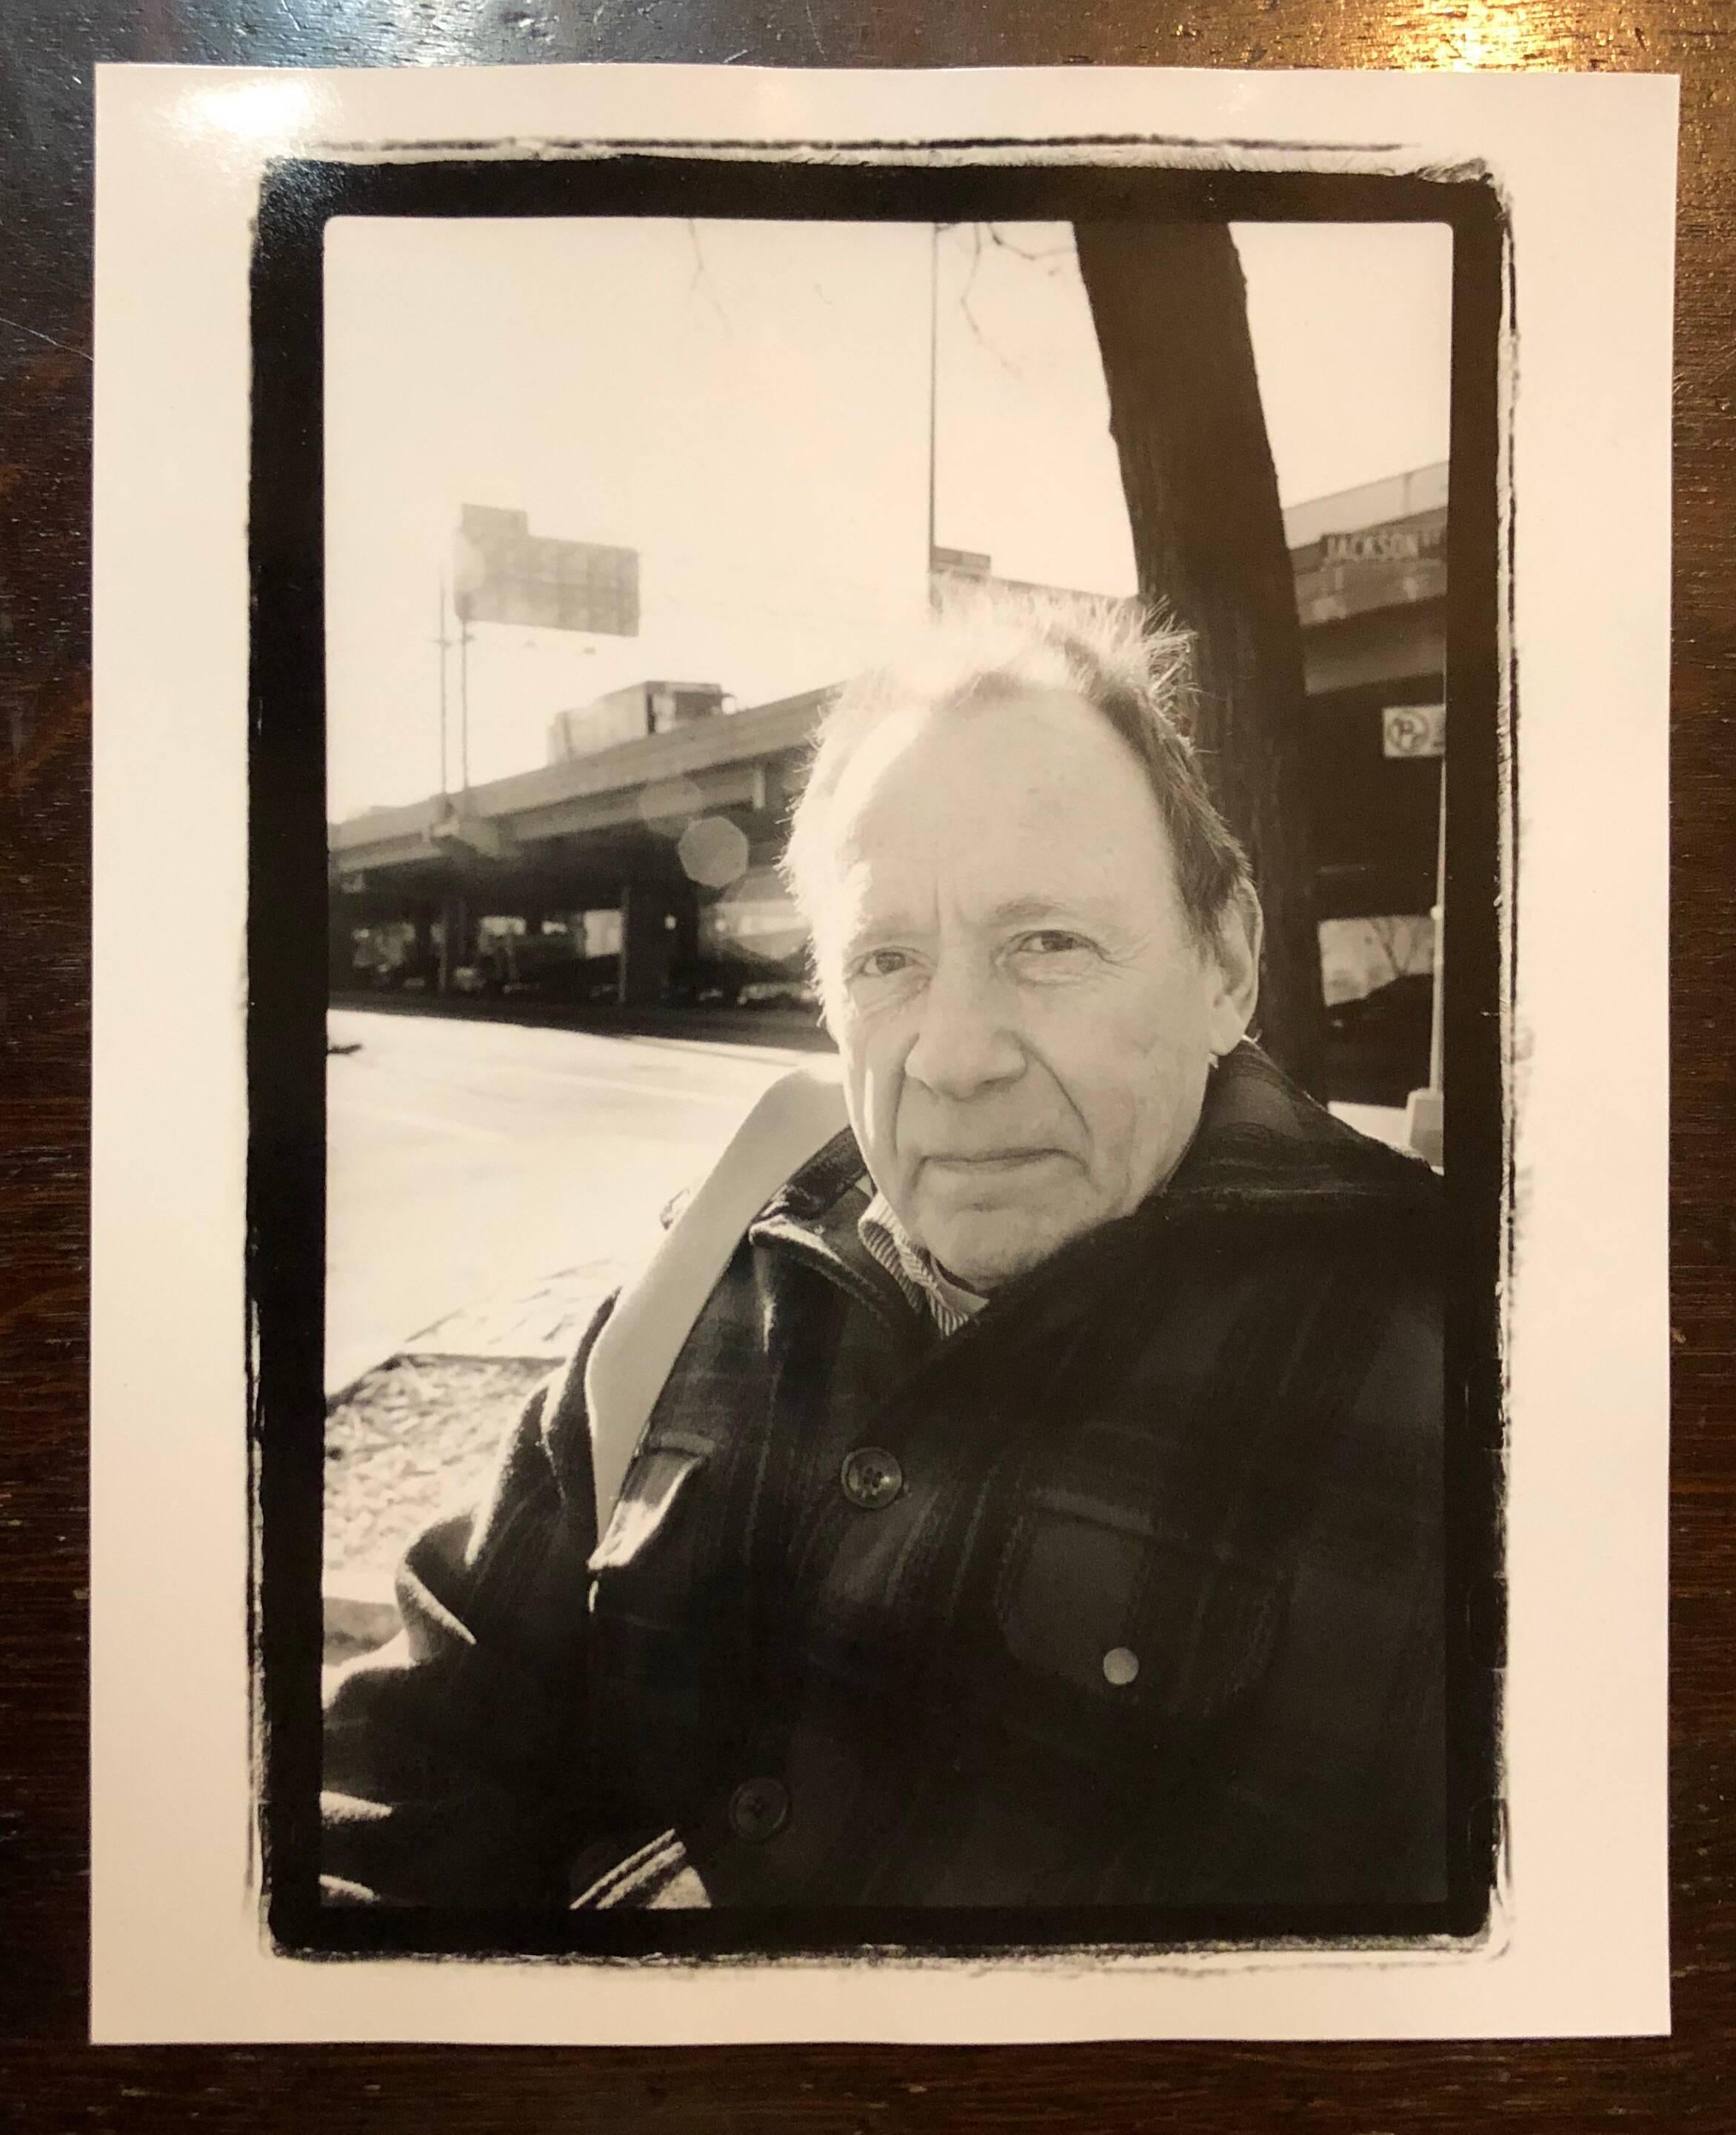 Gerard Joseph Malanga (born March 20, 1943) is an American poet, photographer, filmmaker, curator and archivist.
Malanga was born in the Bronx in 1943, the only child of Italian immigrant parents. In 1959, at the beginning of his senior year at the